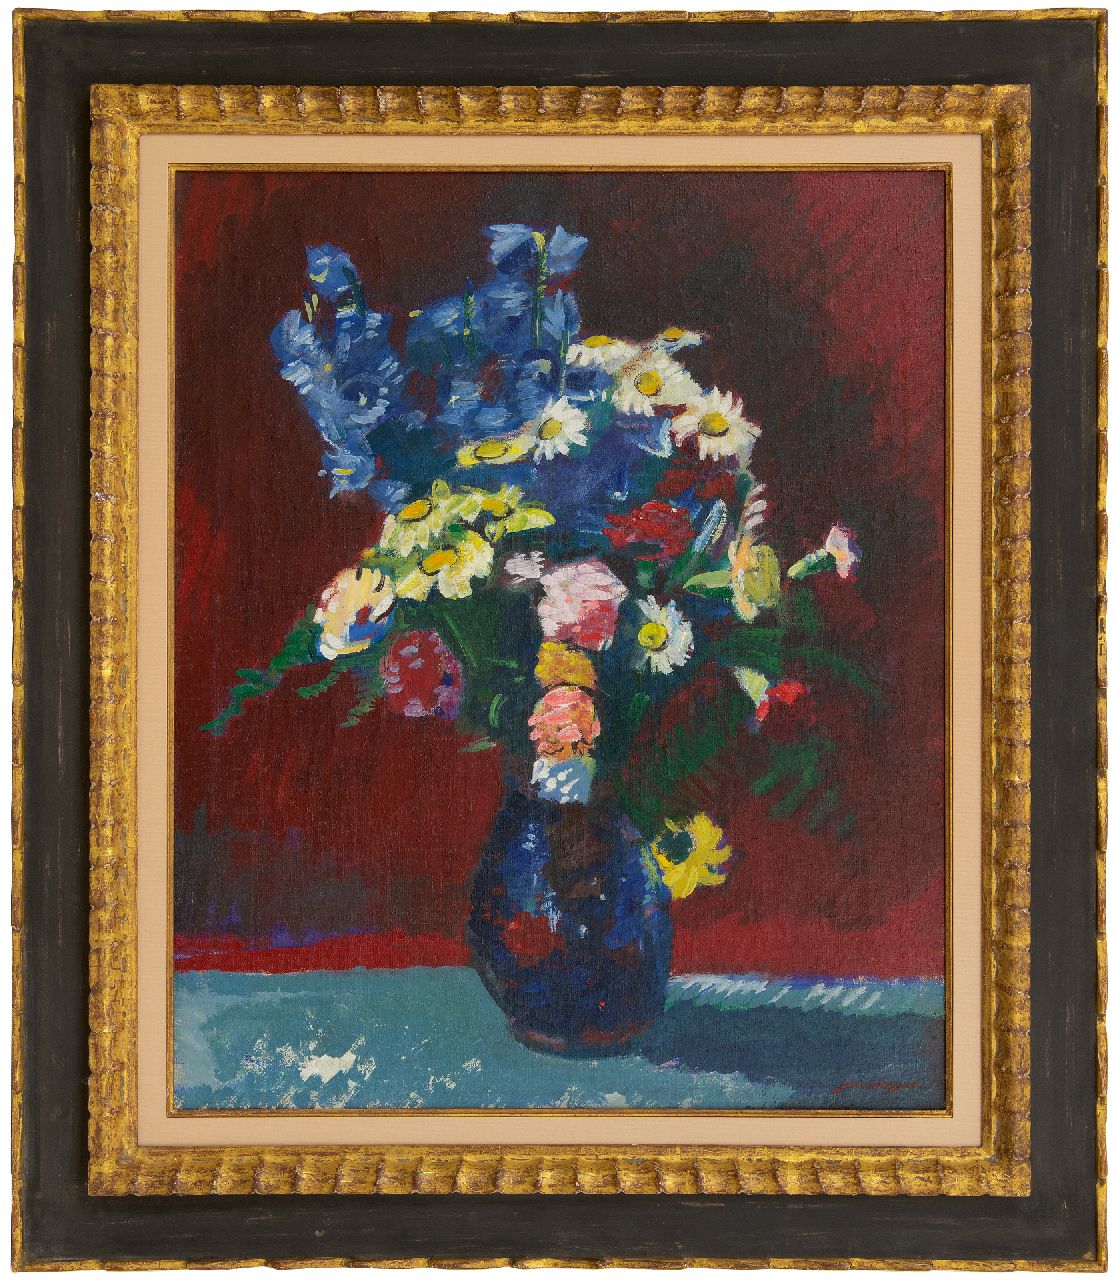 Wiegers J.  | Jan Wiegers | Paintings offered for sale | A summer bouquet, oil on canvas 73.7 x 60.3 cm, signed l.r. and dated '41